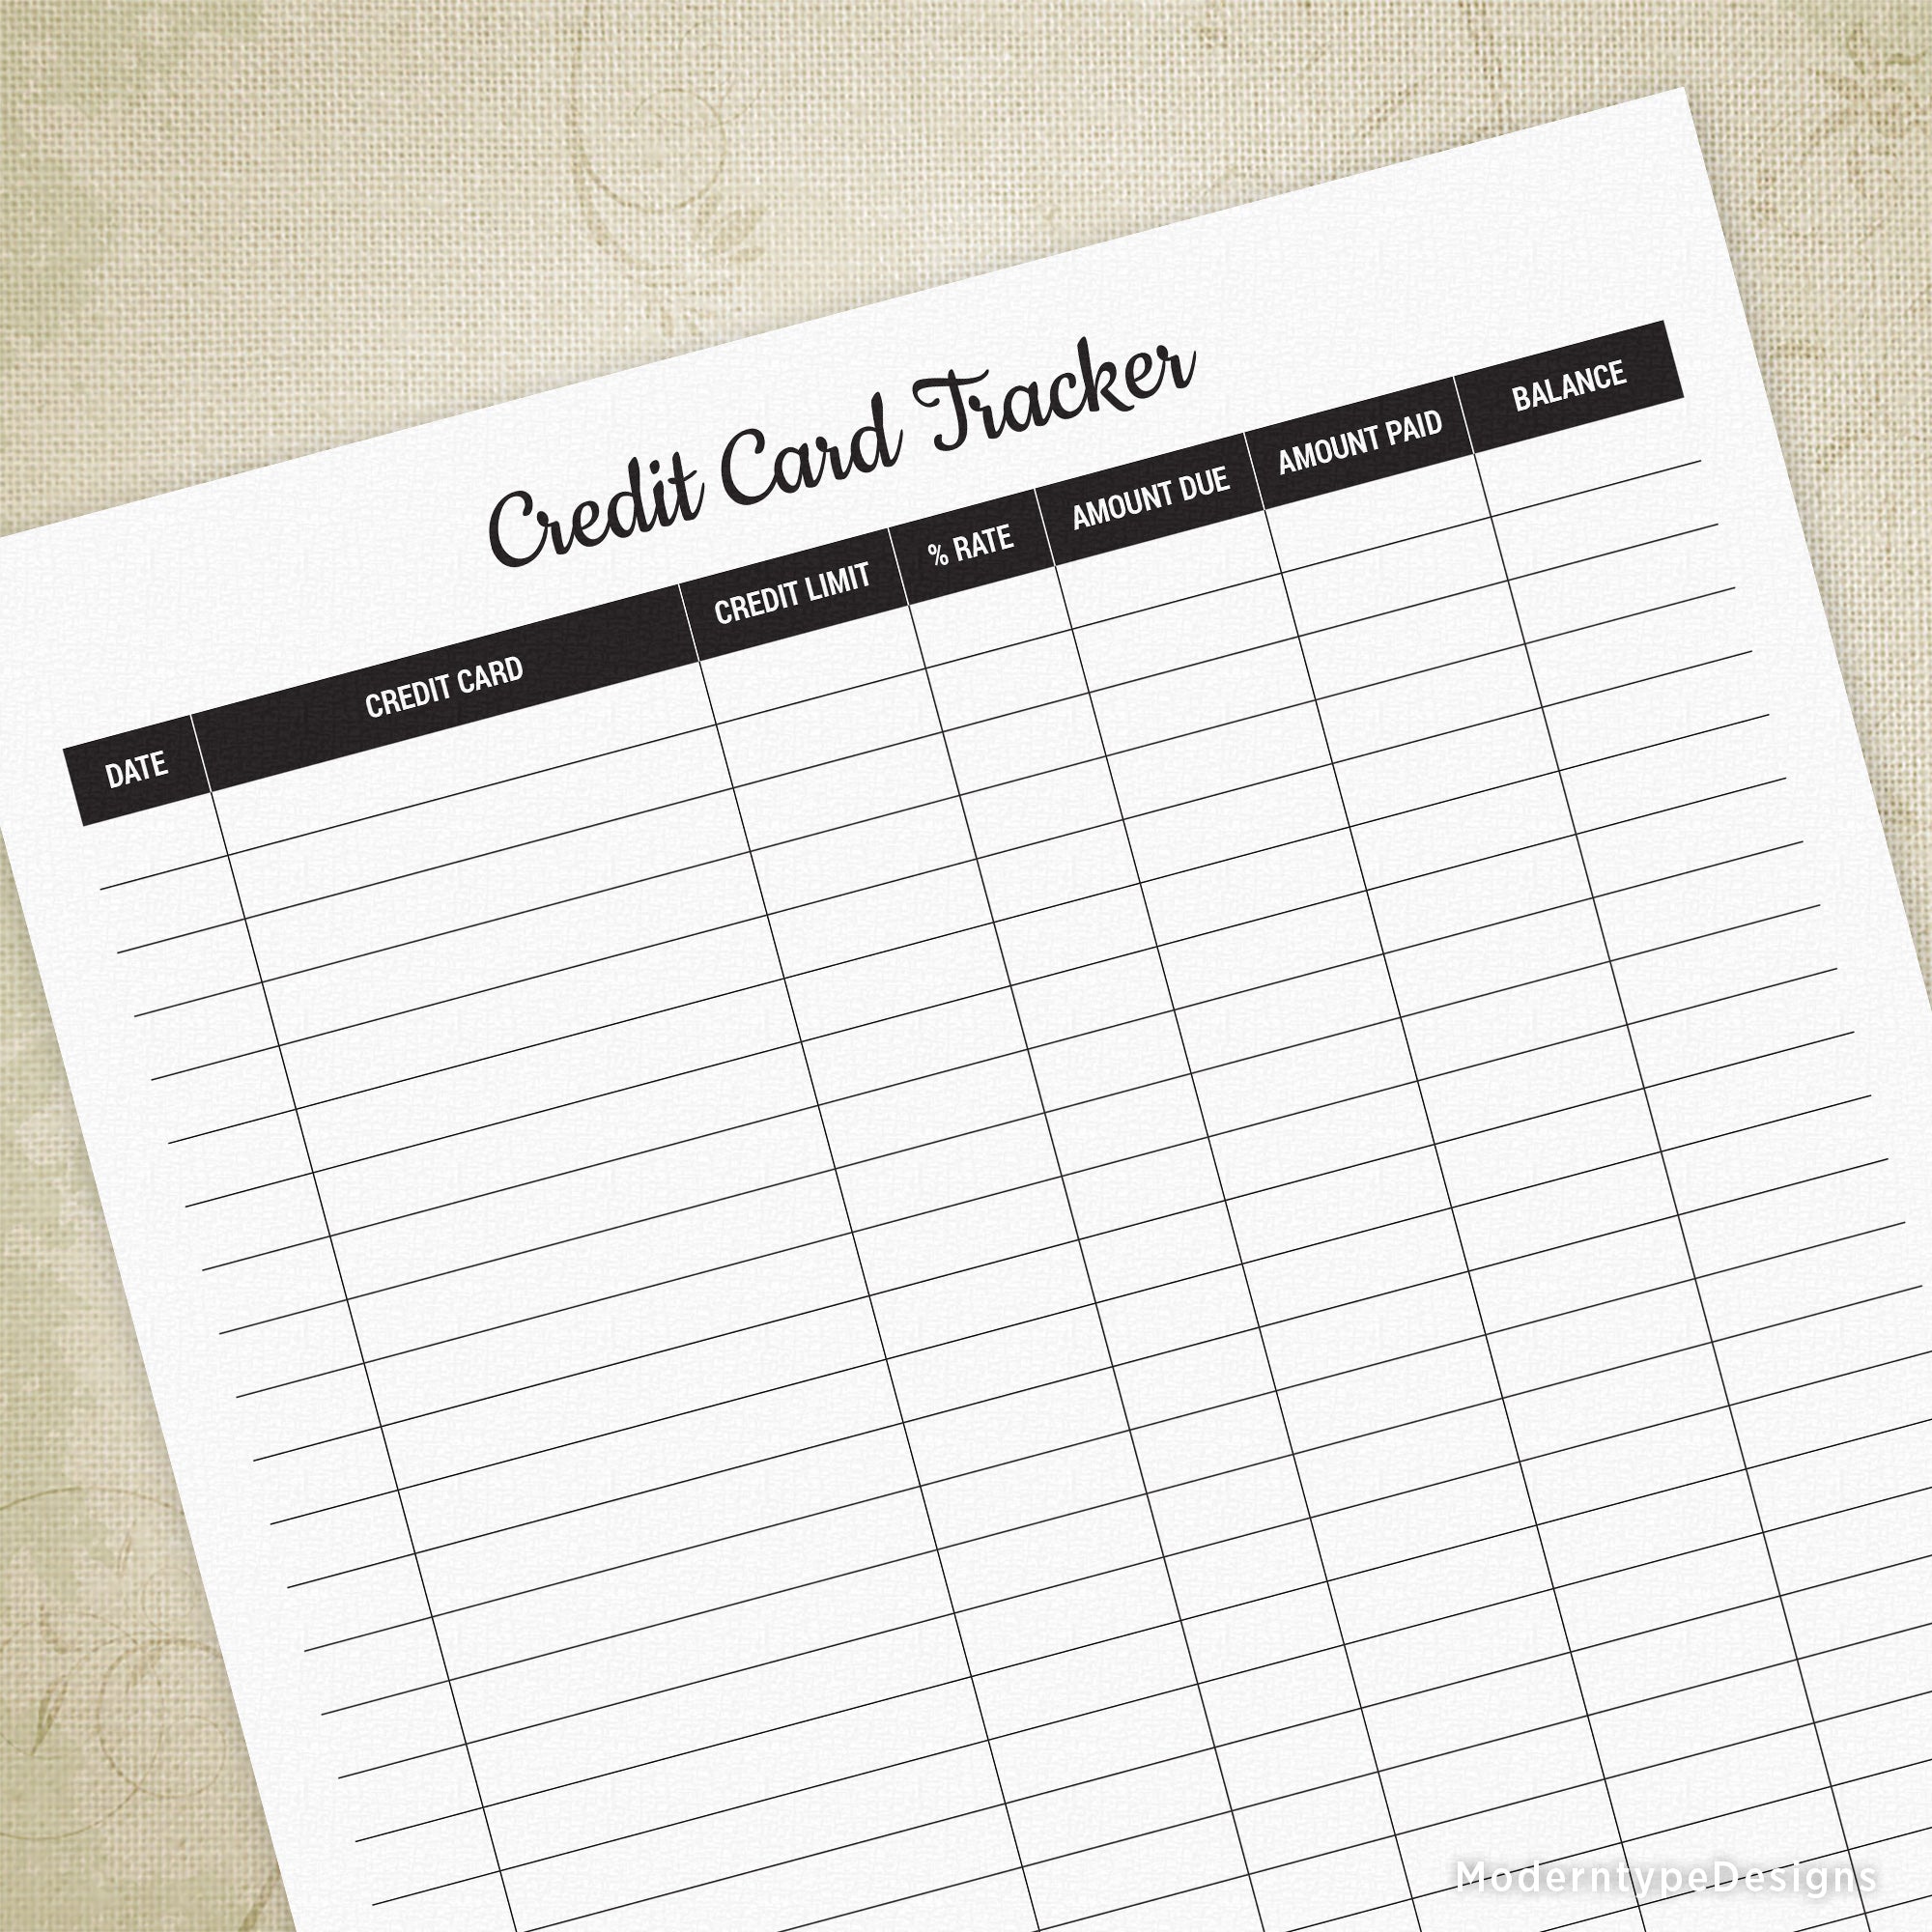 credit-card-tracking-credit-card-rewards-tracking-spreadsheet-in